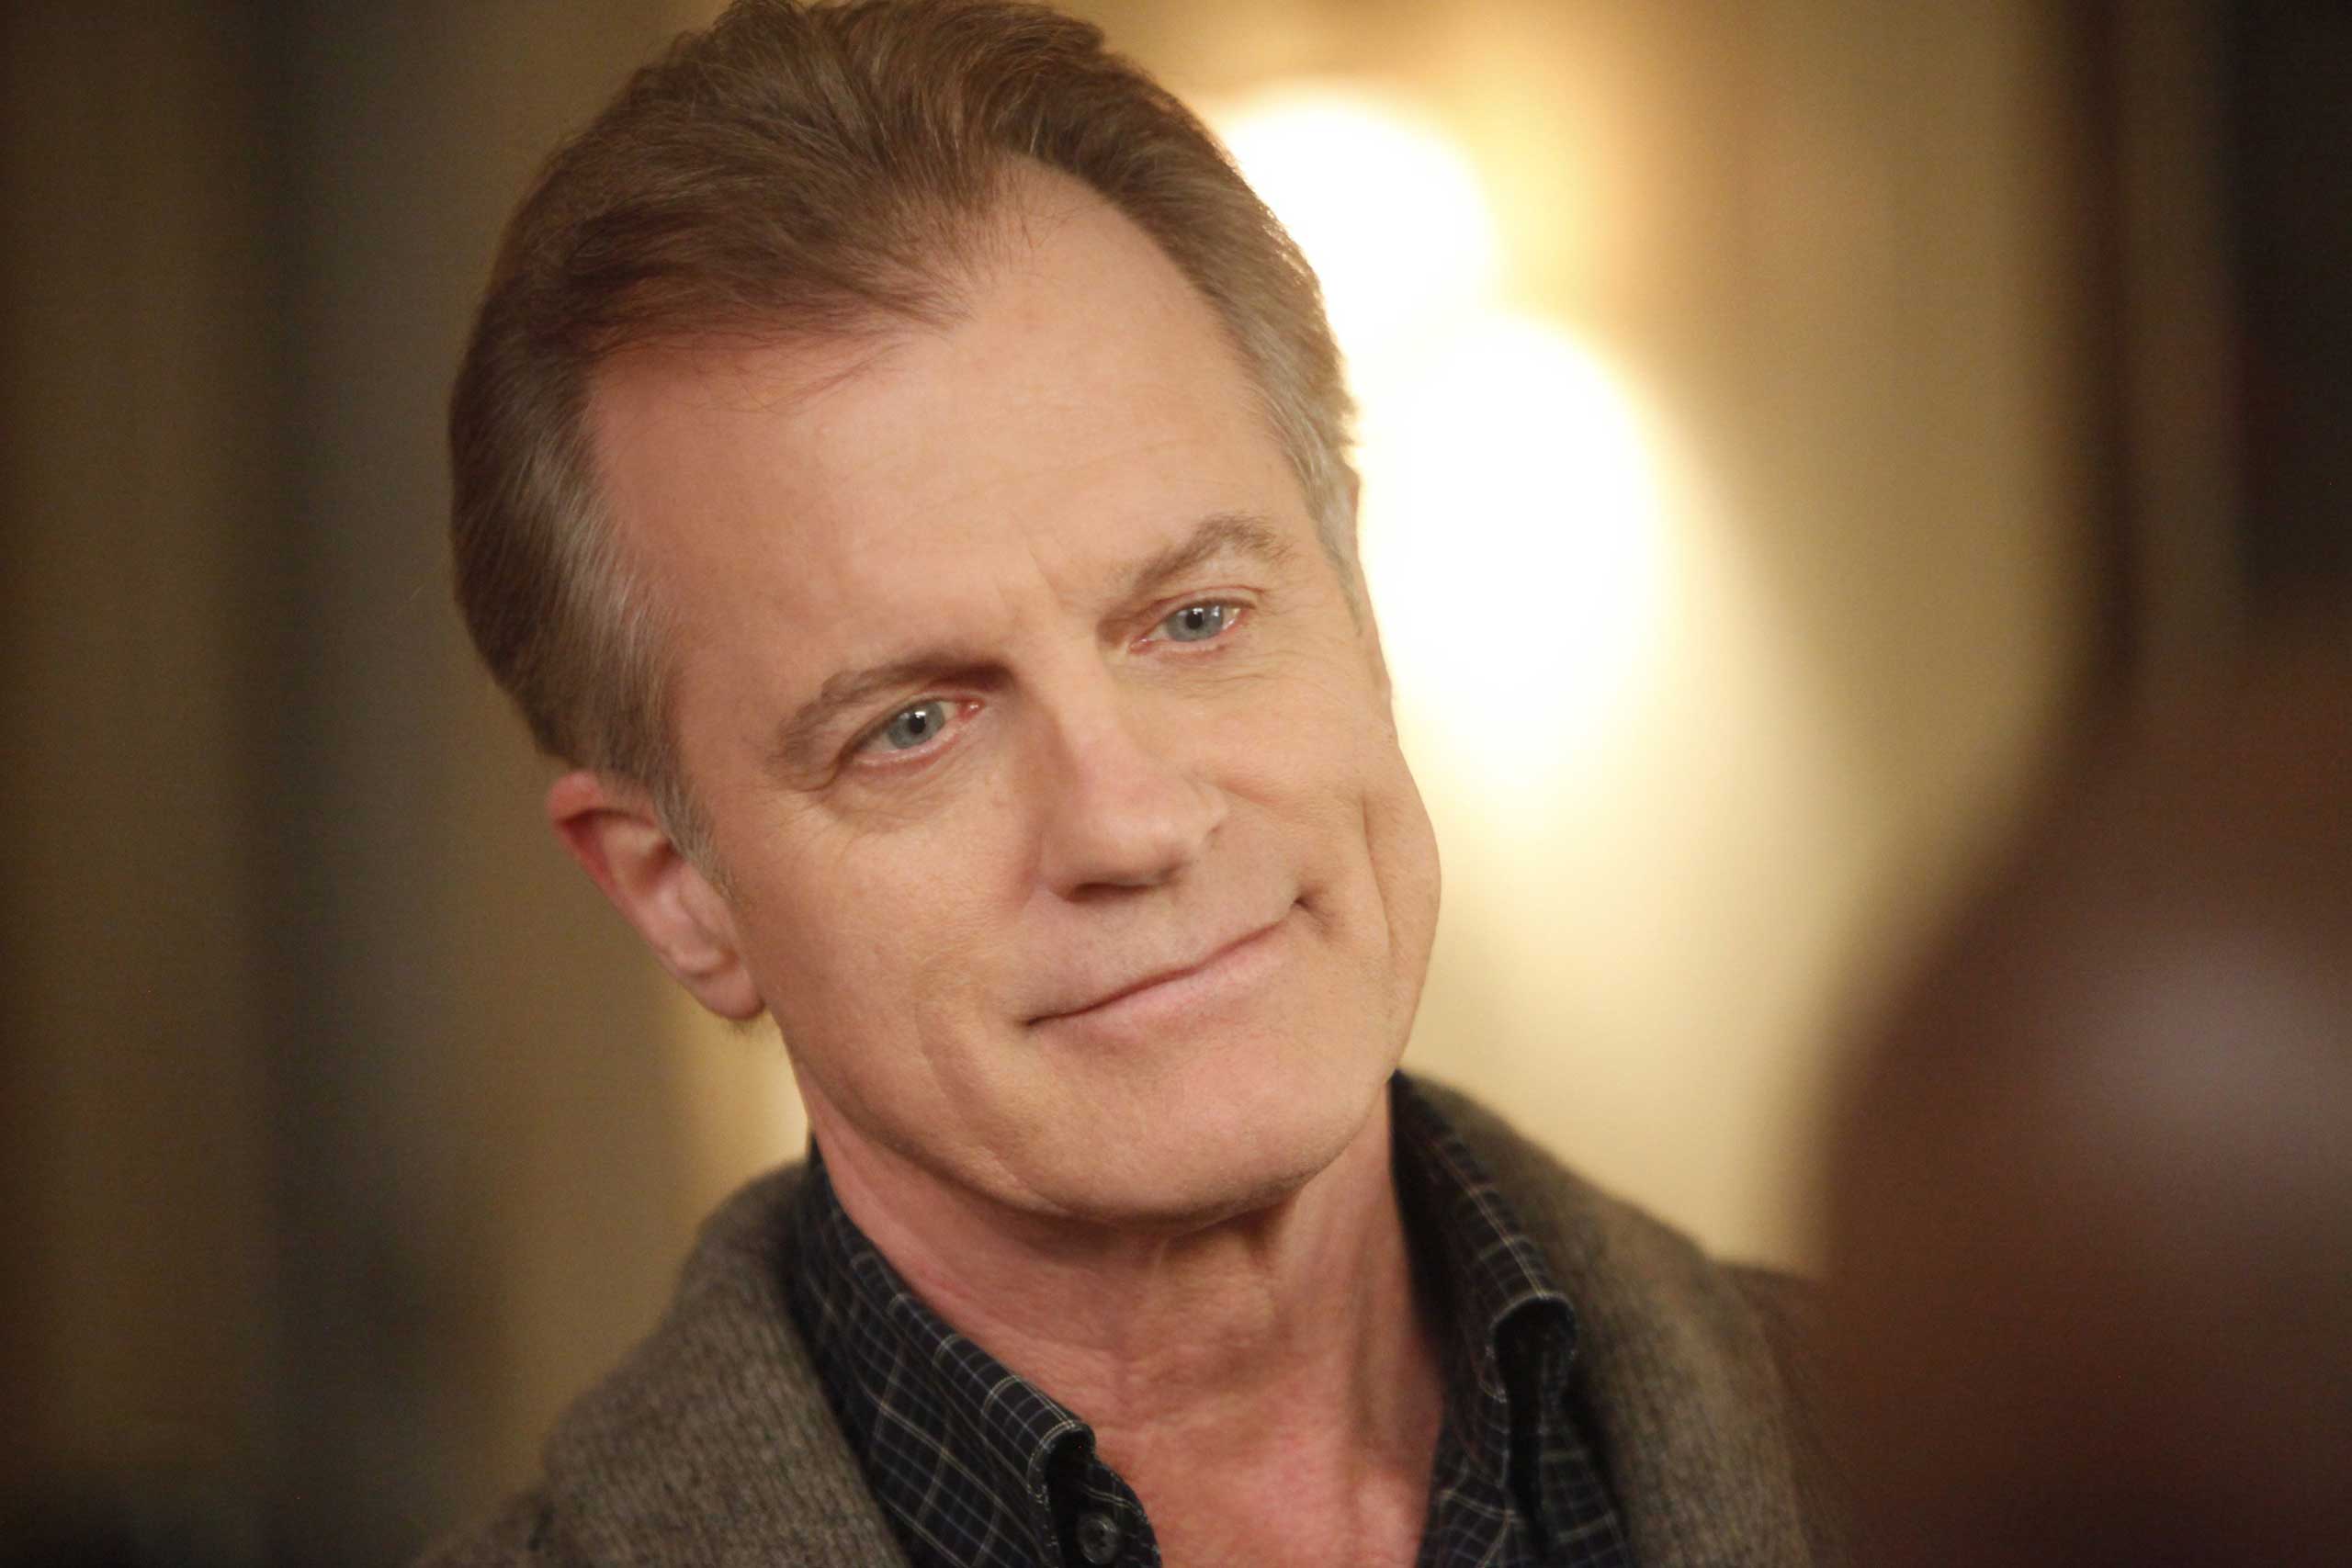 Recently released audio purports to reveal the actor Stephen Collins admitting to molesting children.